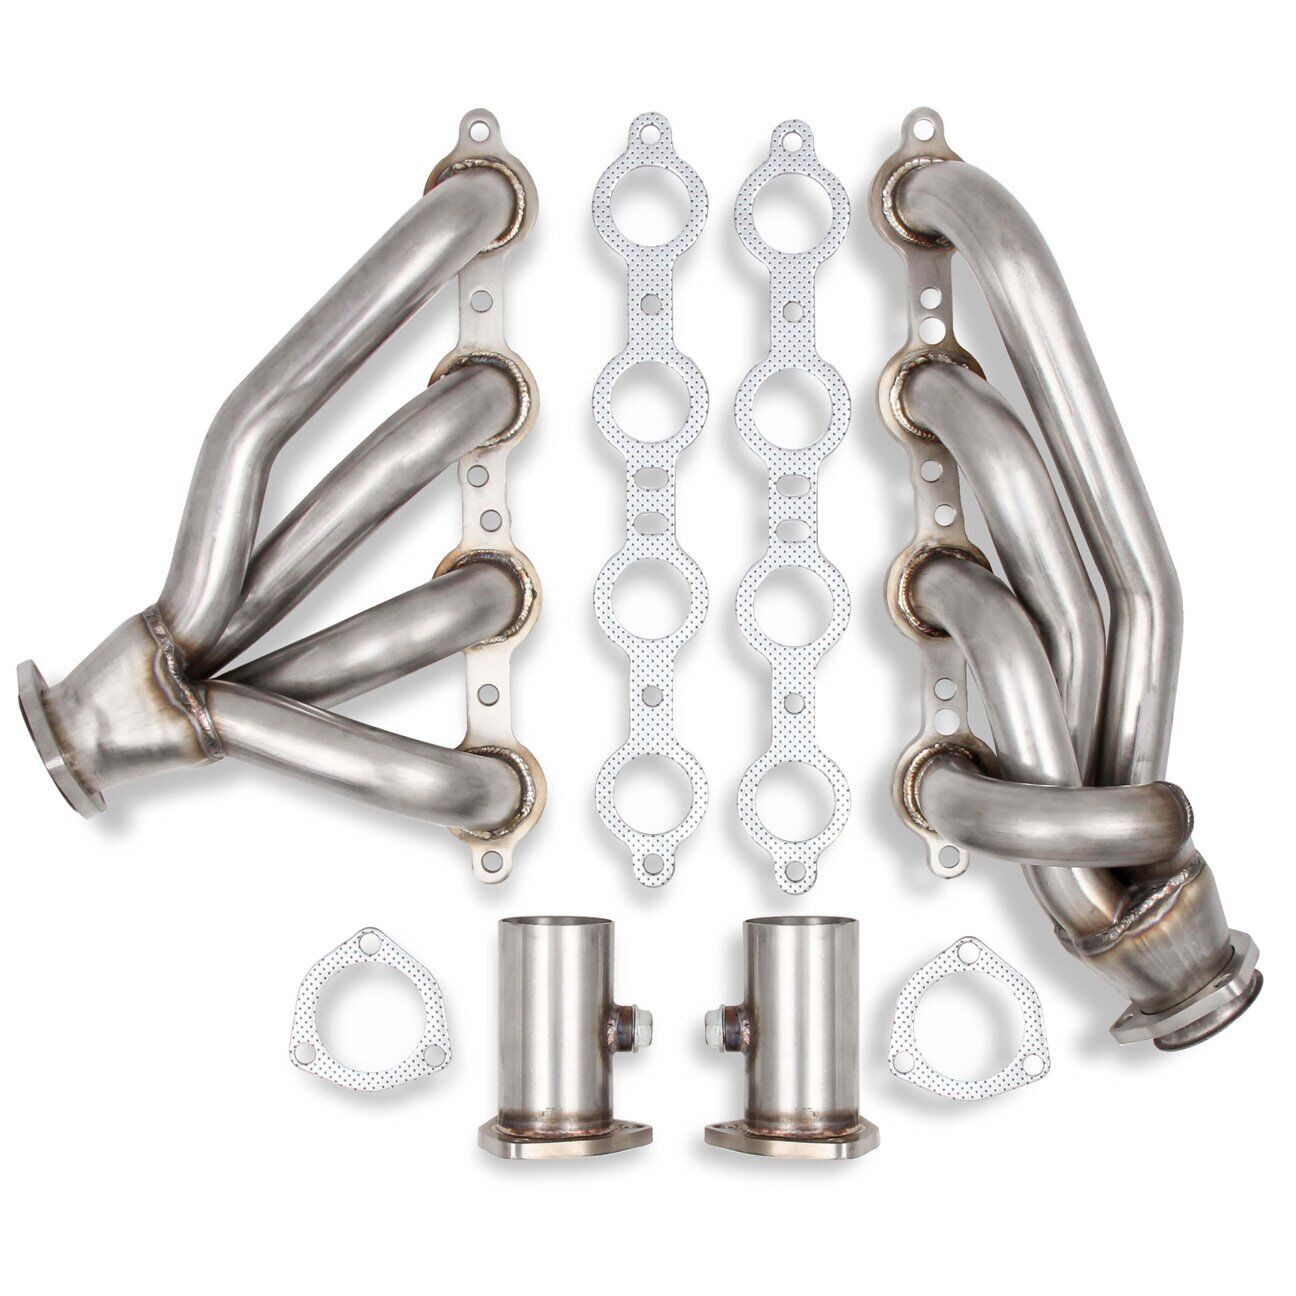 Flowtech 11578FLT Shorty Headers 1982-2004 GM S-10 S-15 Sonoma 2WD with LS Engin